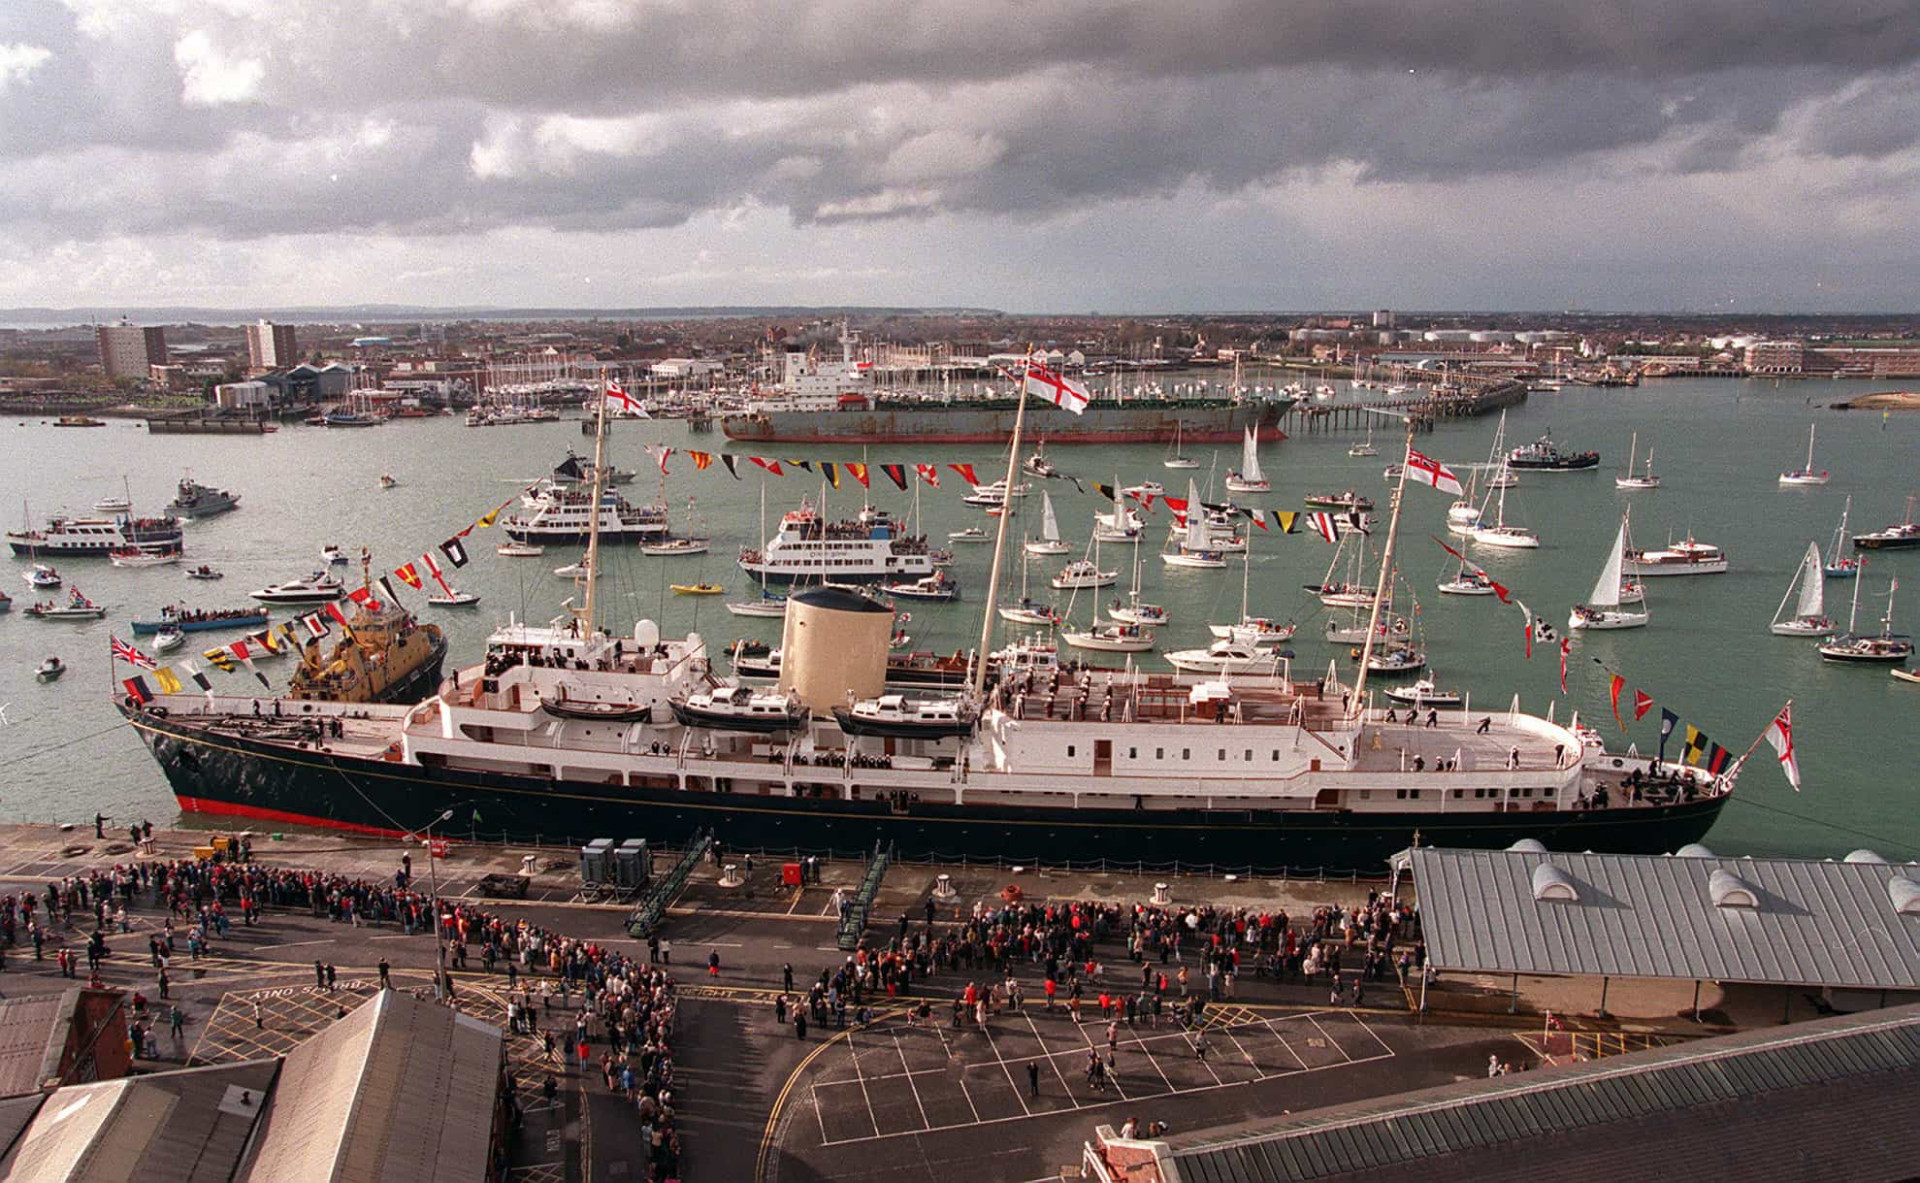 <p><em>Britannia</em> is pictured returning to Portsmouth in November 1997. The vessel would be decommissioned the following month. Thousands of well-wishers lined the shore and gathered at the entrance to the harbor to witness the historic moment as the grand old lady of the seas arrived at the end of her farewell tour of Britain.</p>